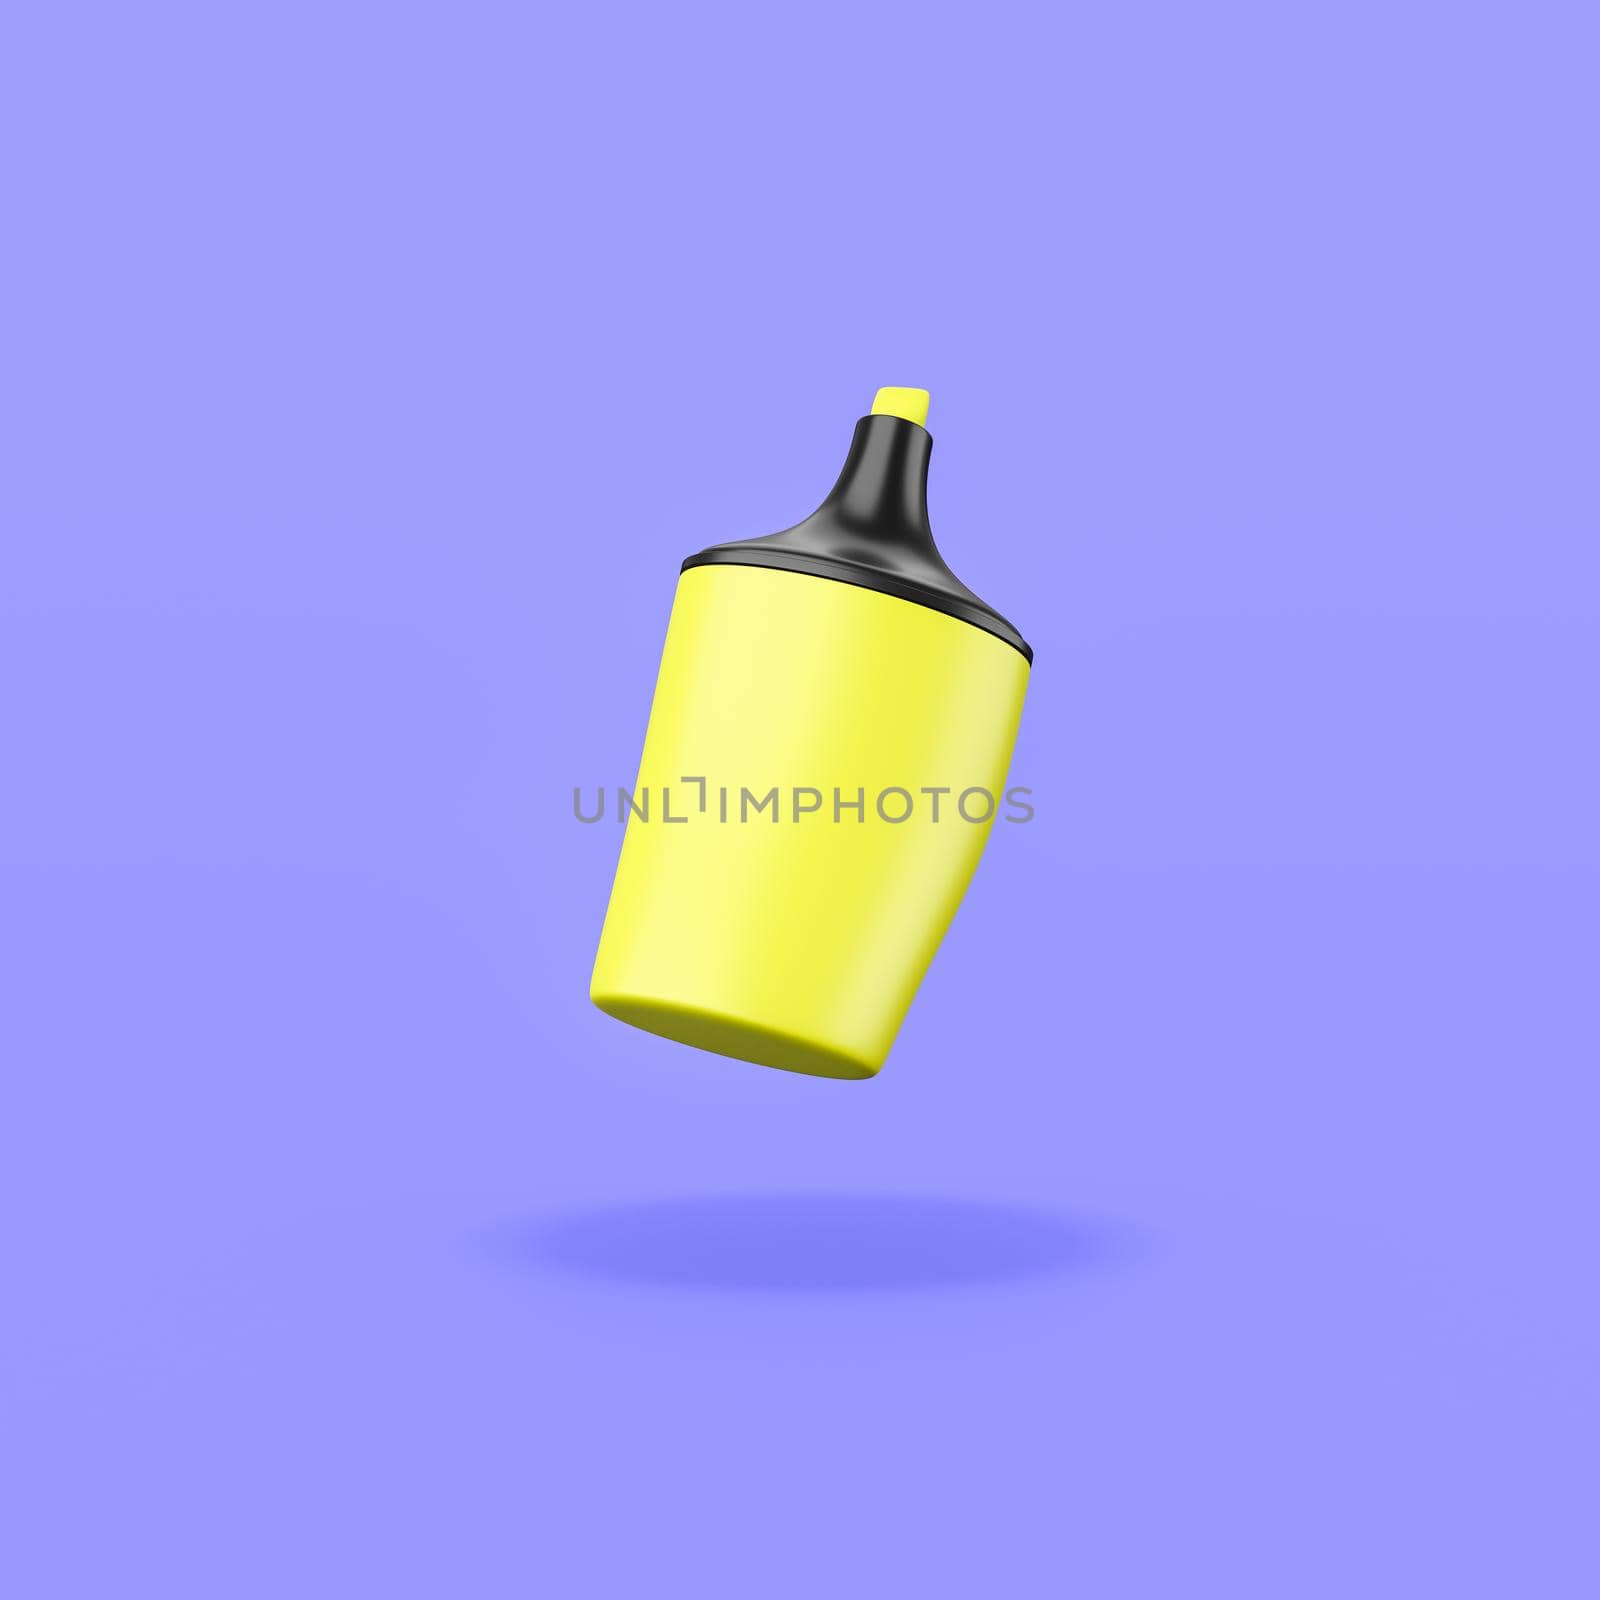 One Single Cartoon Yellow Highlighter Isolated on Flat Purple Background with Shadow 3D Illustration